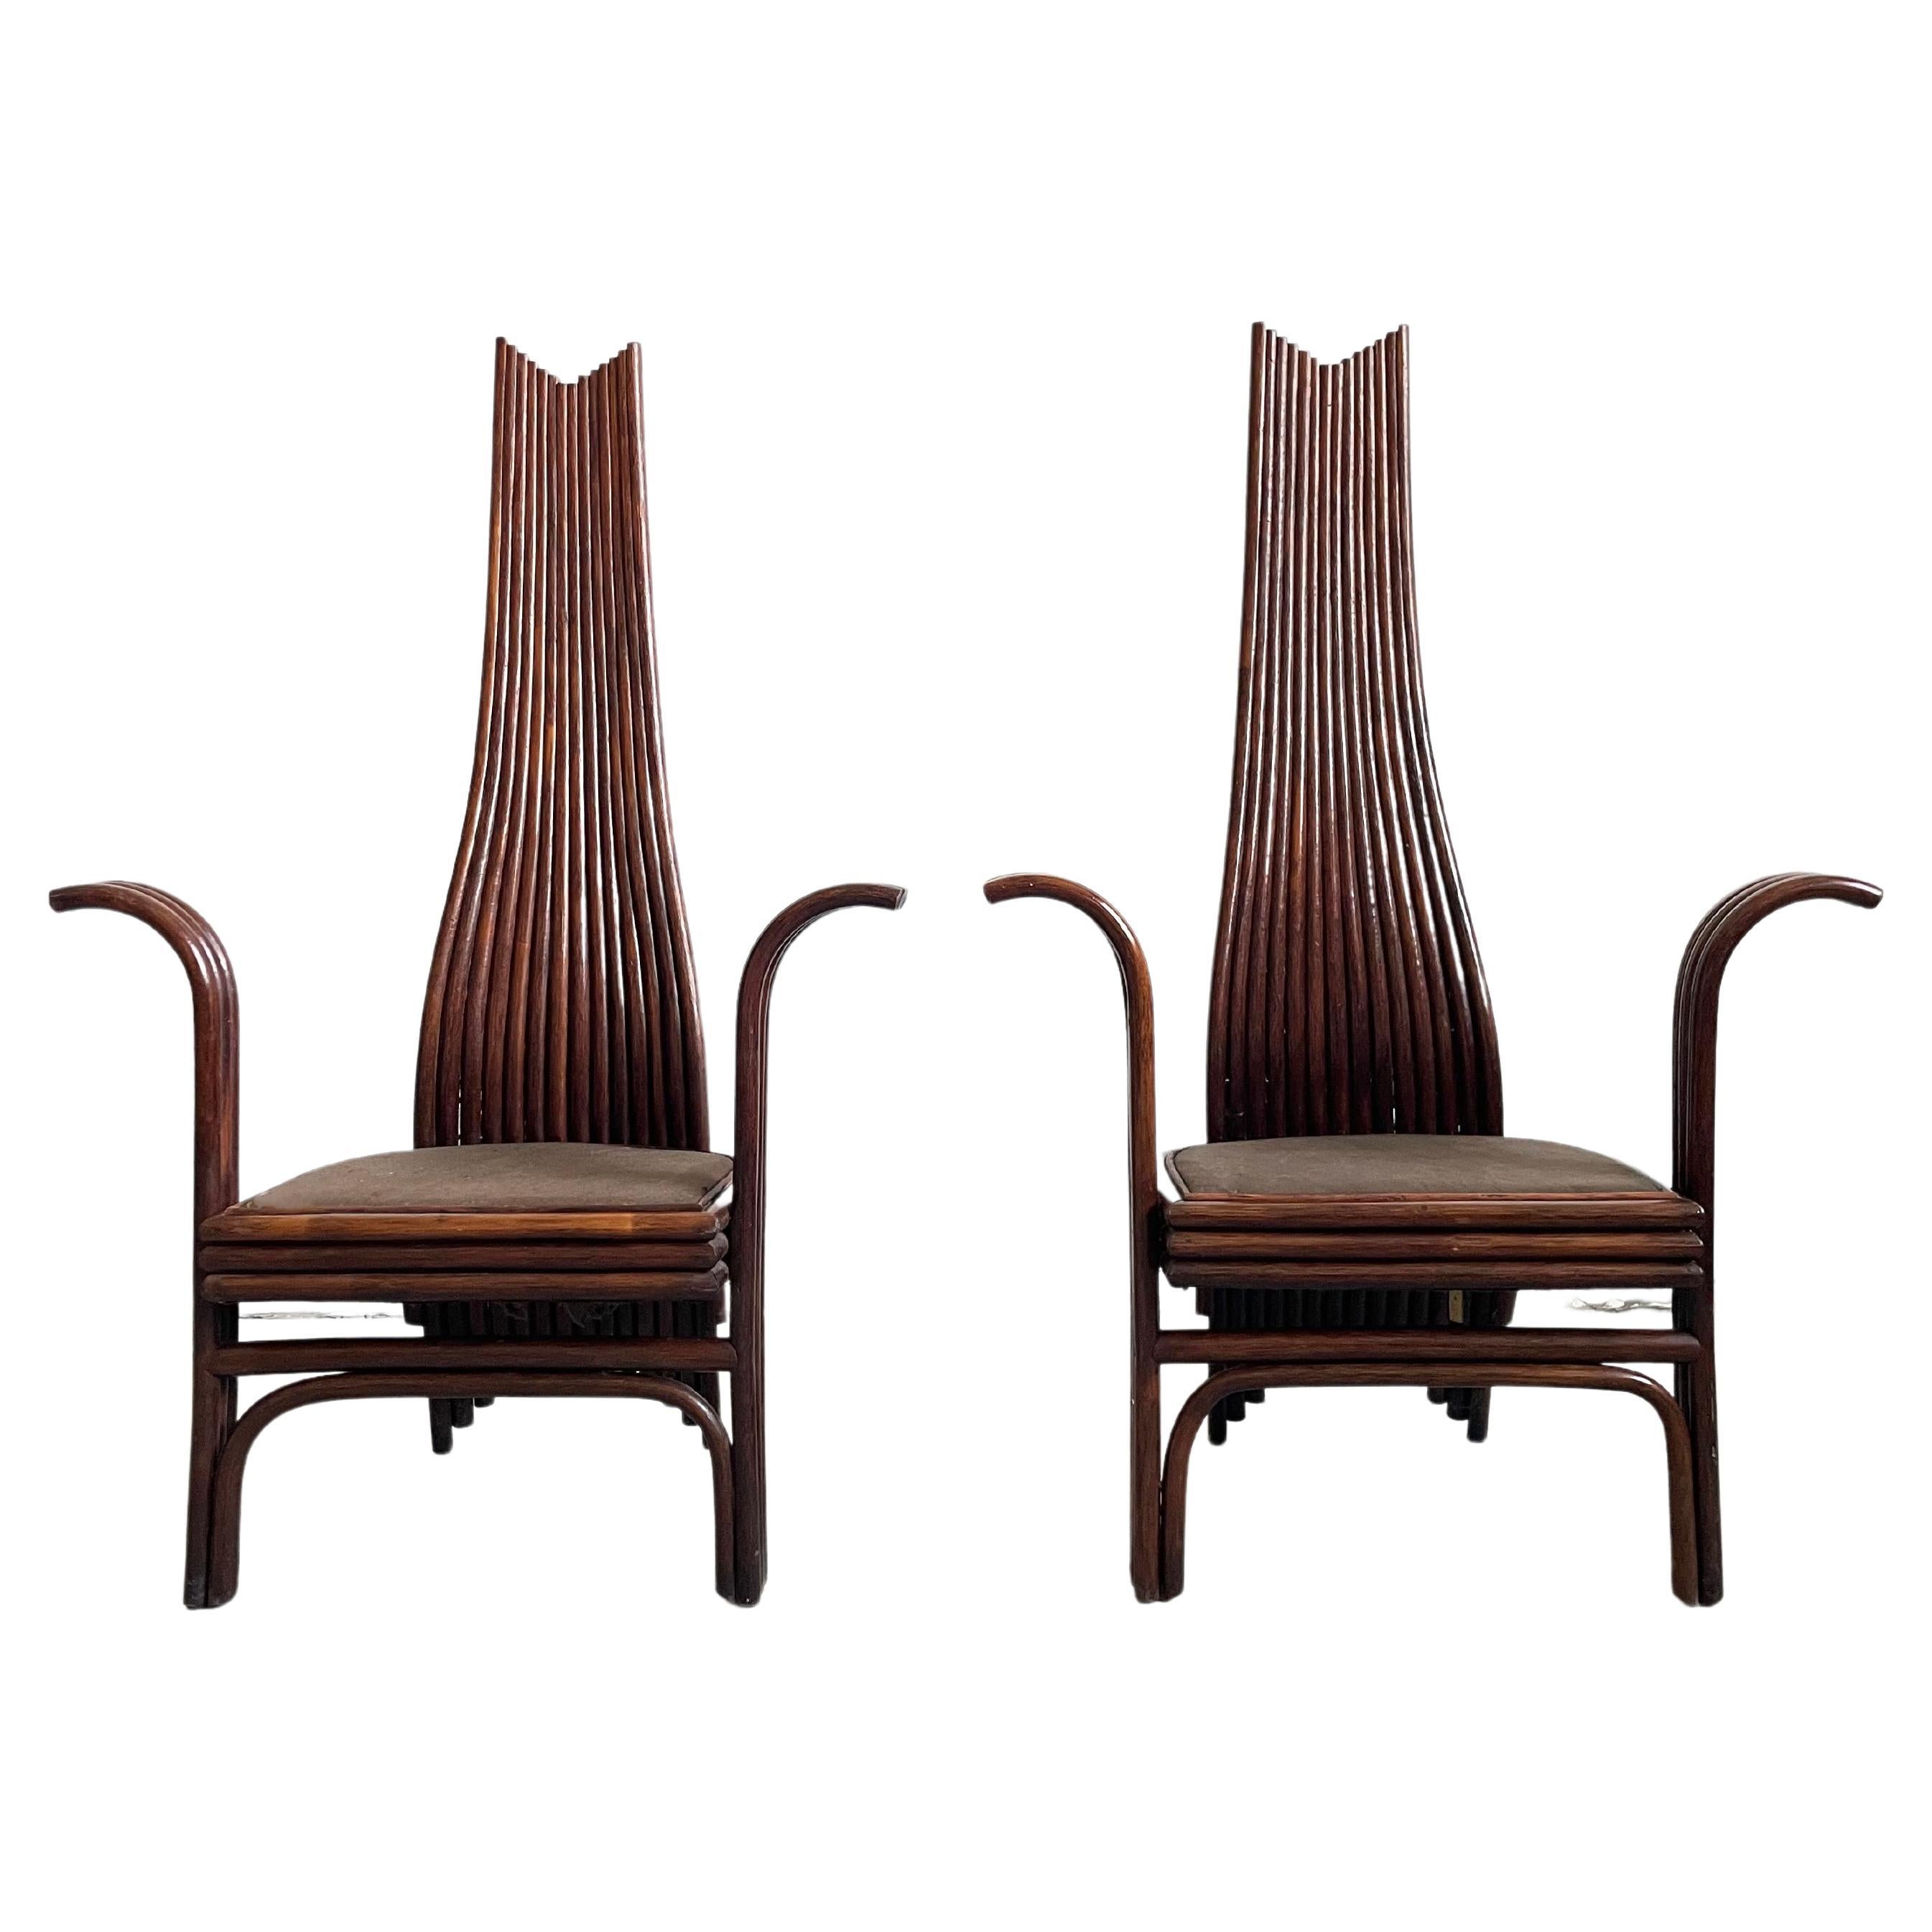 Set of 2 Bamboo High back Curved Dining Chairs with armrests, Mcguire USA 1970s For Sale